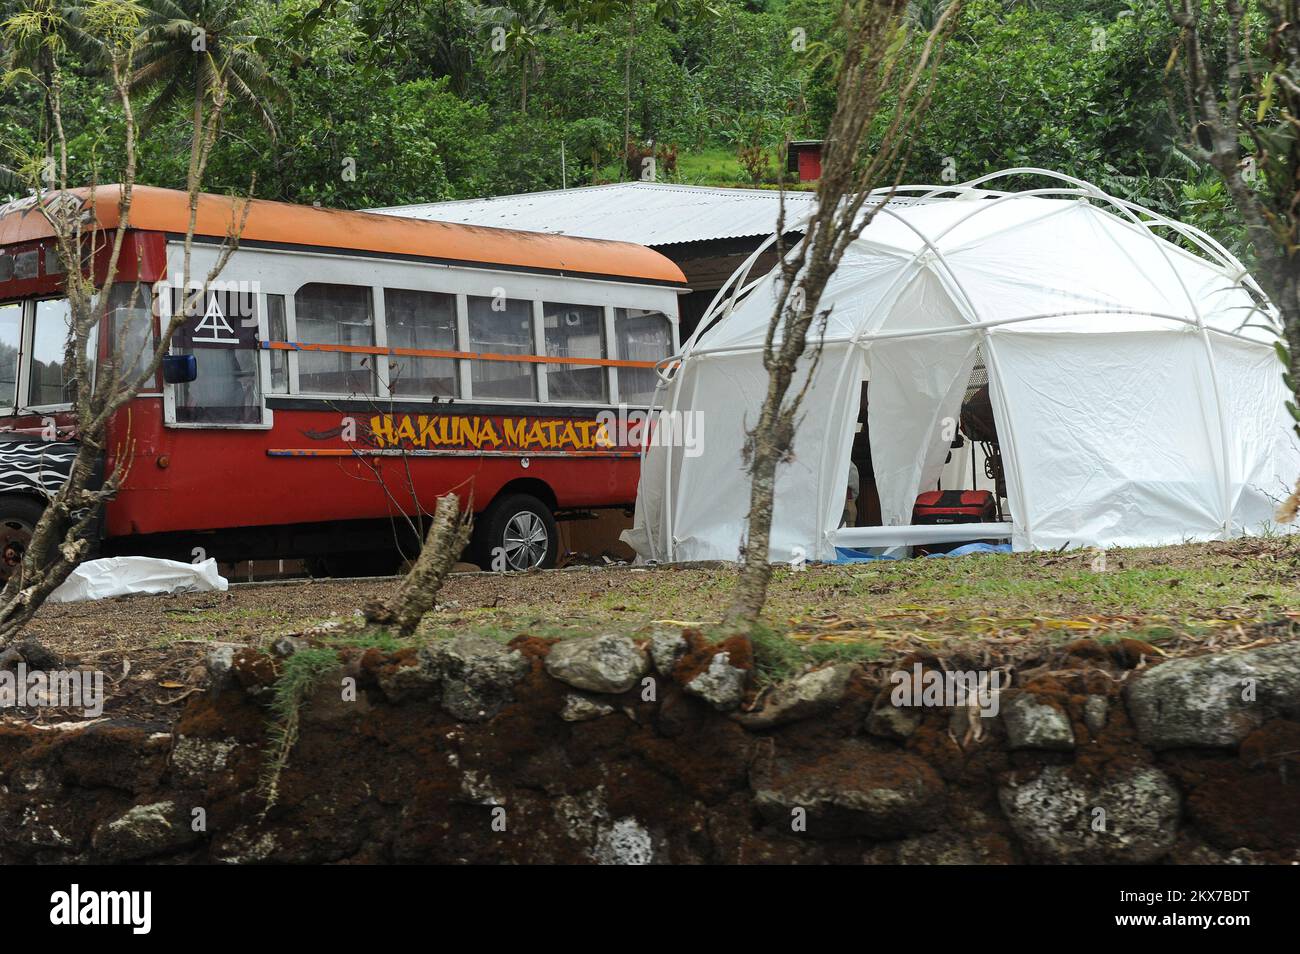 Hakuna Matata - No Worries. American Samoa Earthquake, Tsunami, and Flooding. Photographs Relating to Disasters and Emergency Management Programs, Activities, and Officials Stock Photo